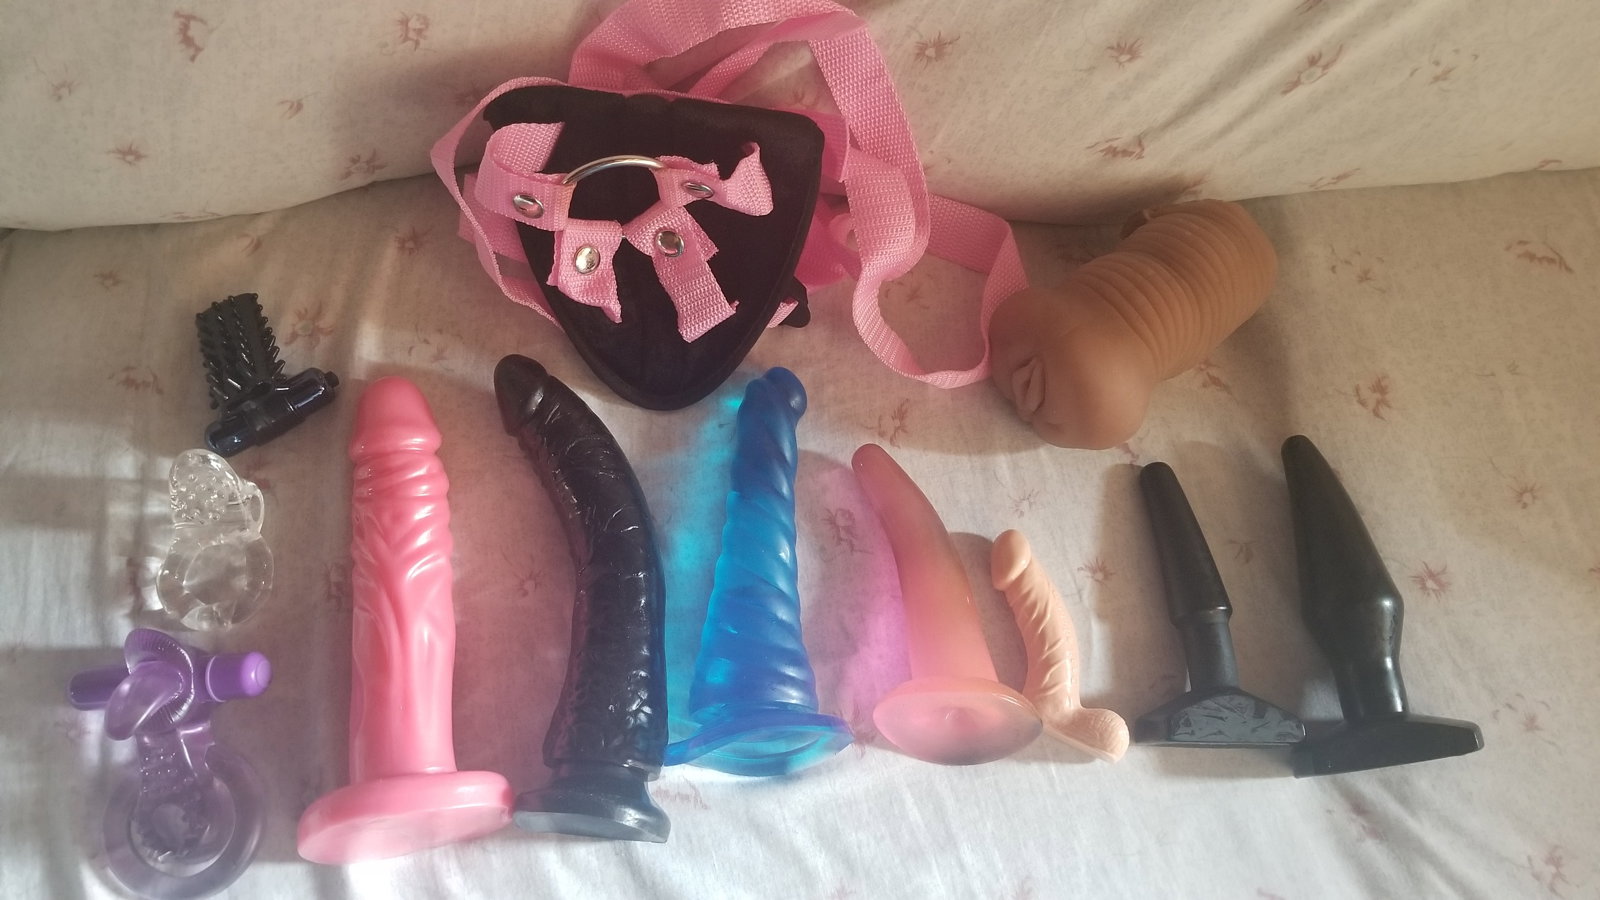 Photo by crowbarsal with the username @crowbarsal, who is a verified user,  December 24, 2018 at 7:22 AM. The post is about the topic Dildo and the text says 'My collection of toys. Can only handle the small ones'